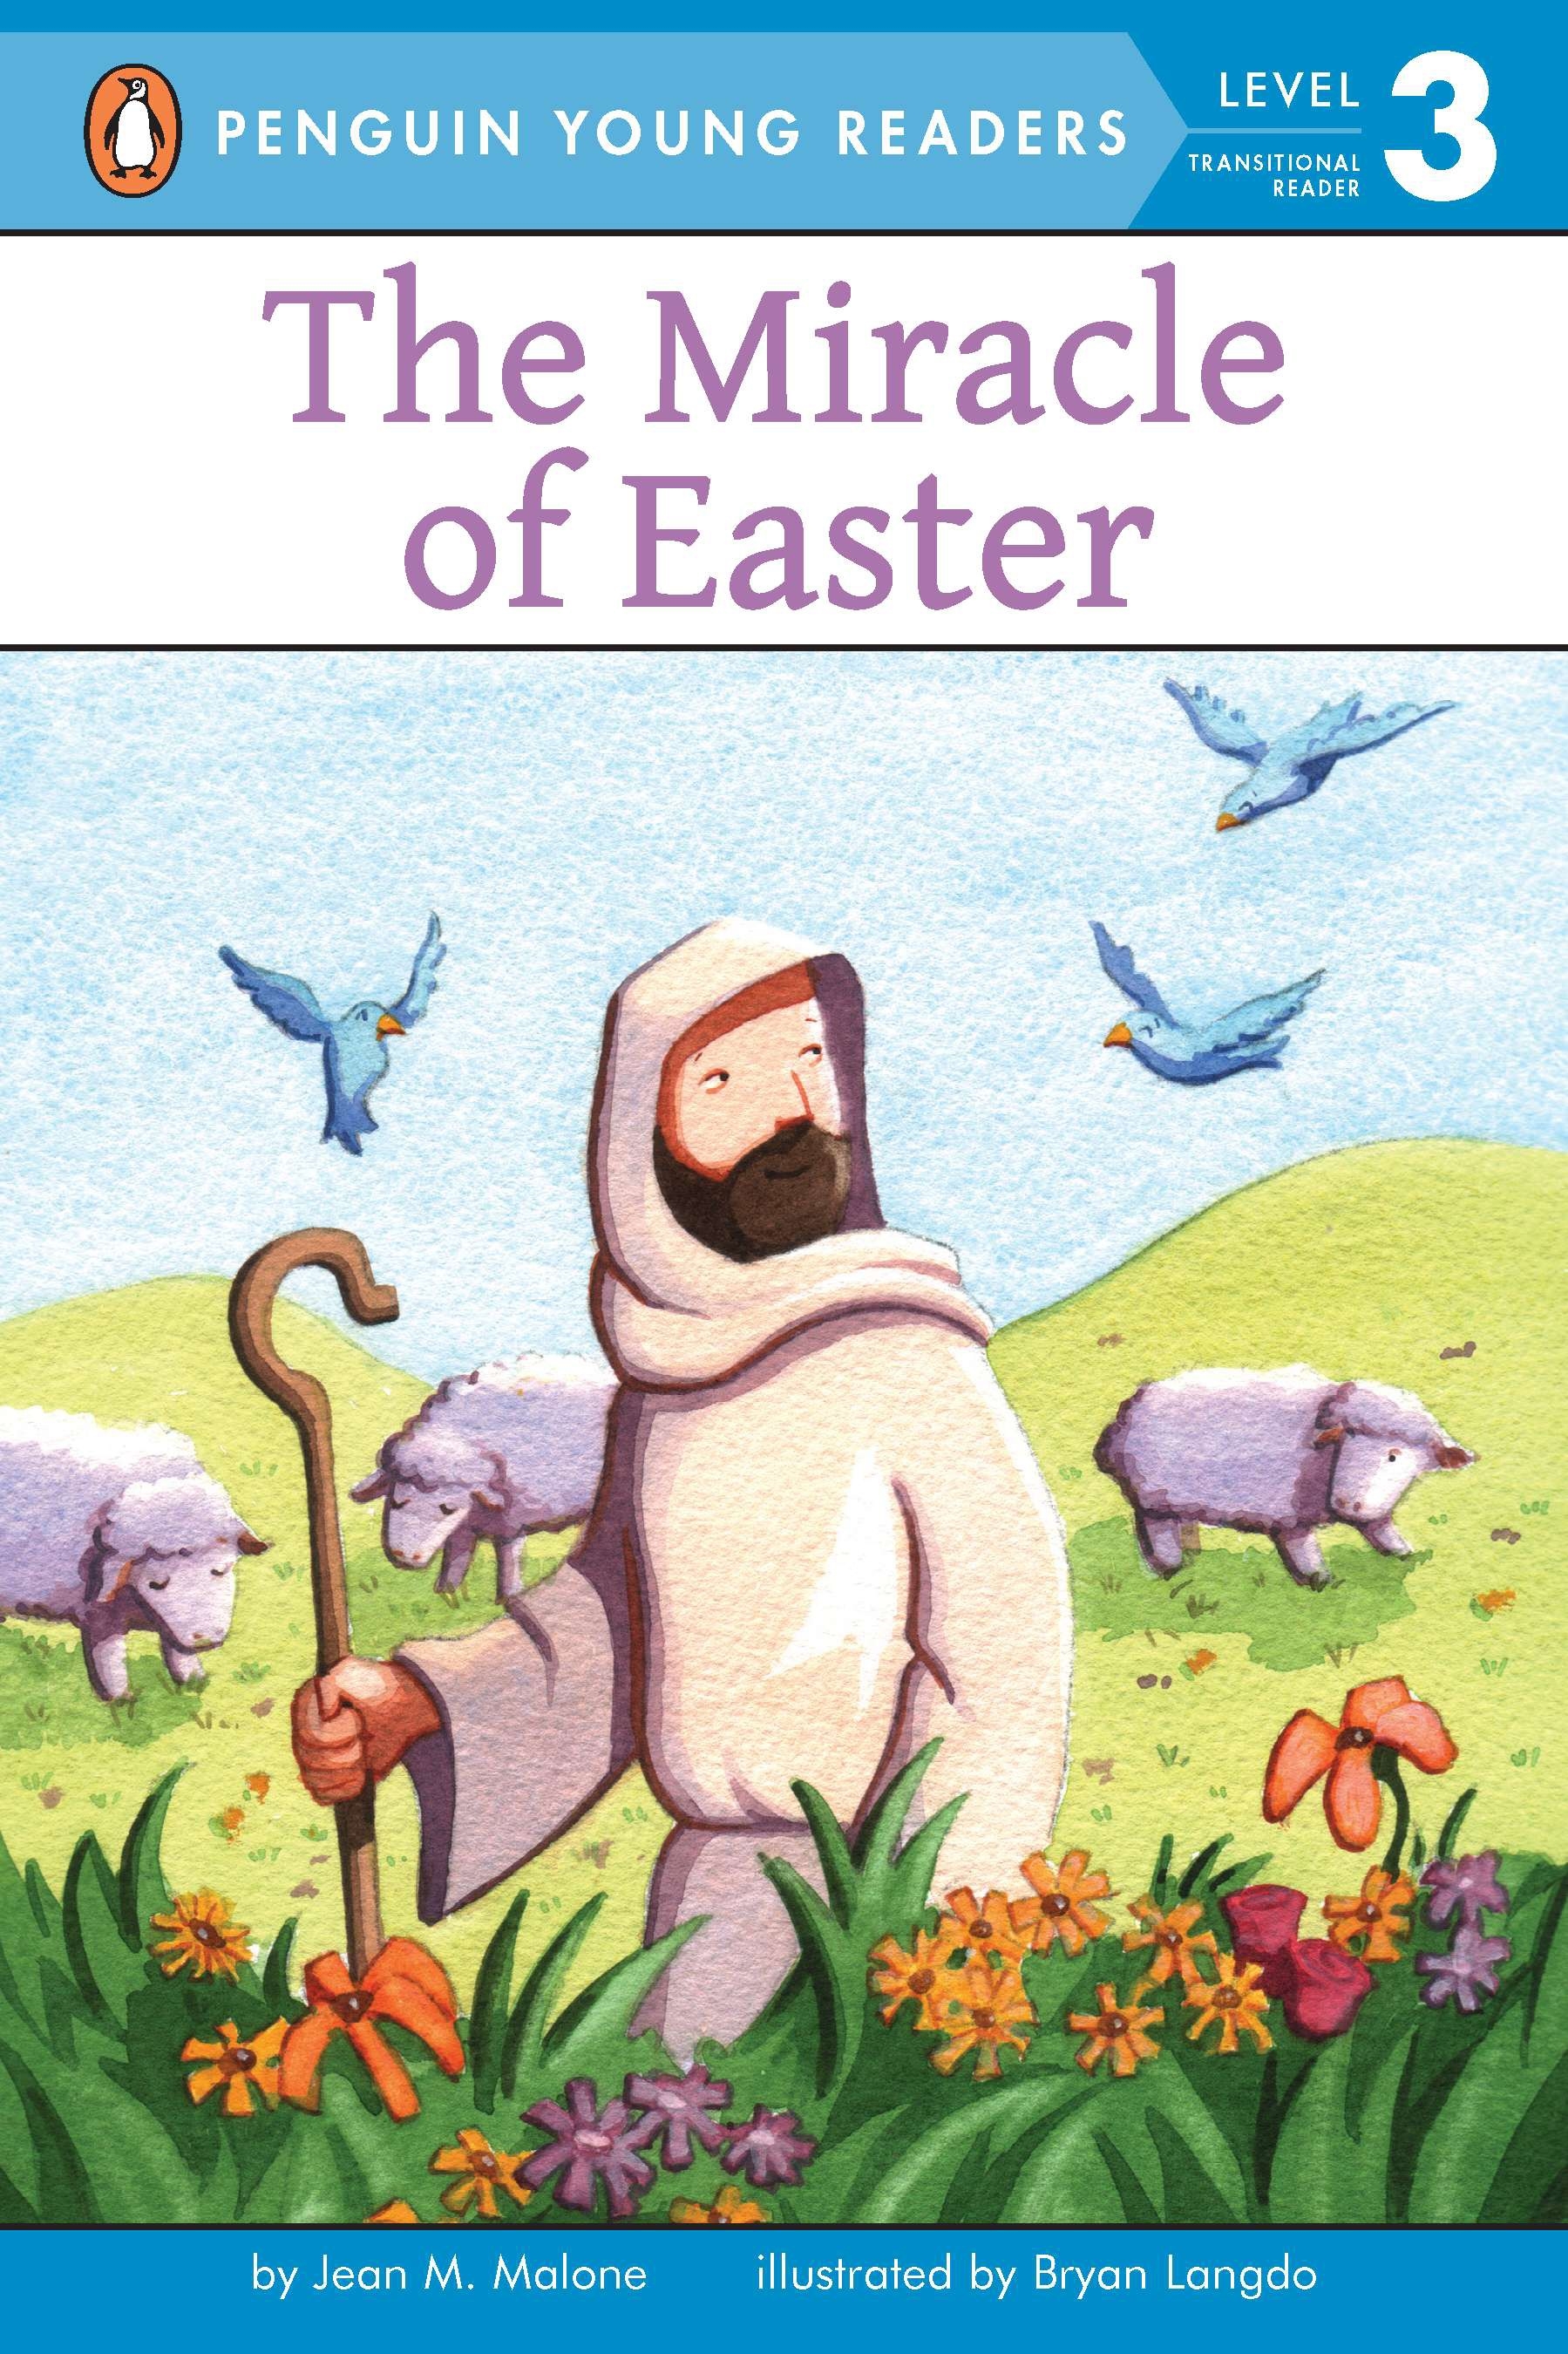 The Miracle of Easter by Jean M. Malone Penguin Books Australia